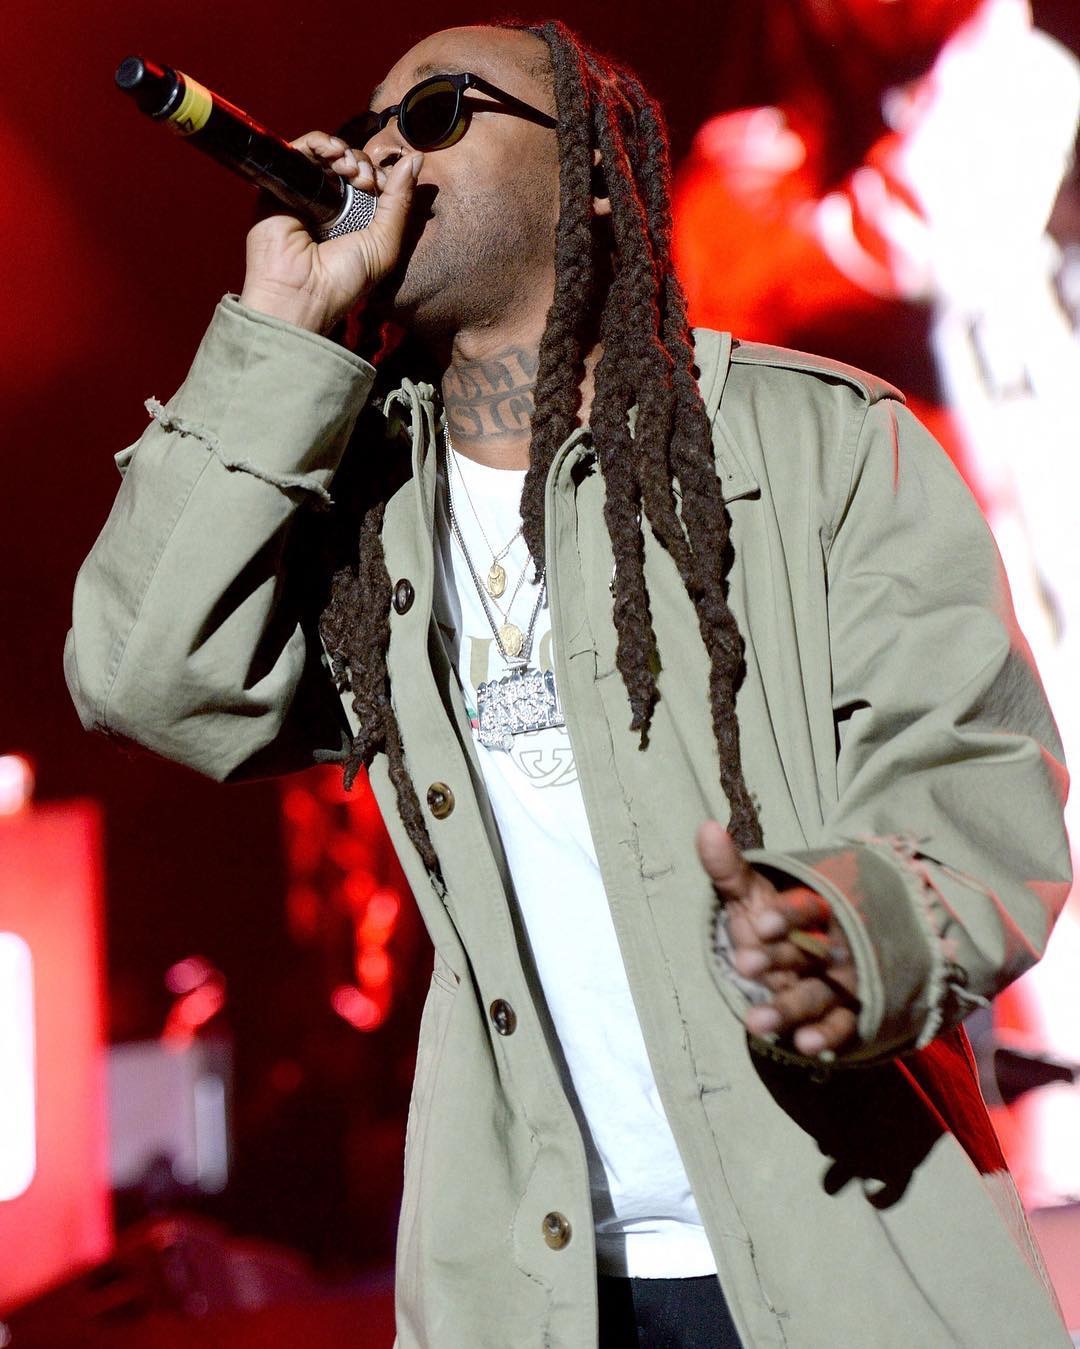 SPOTTED: Ty Dolla Sign Performs In Maison Margiela And Vans